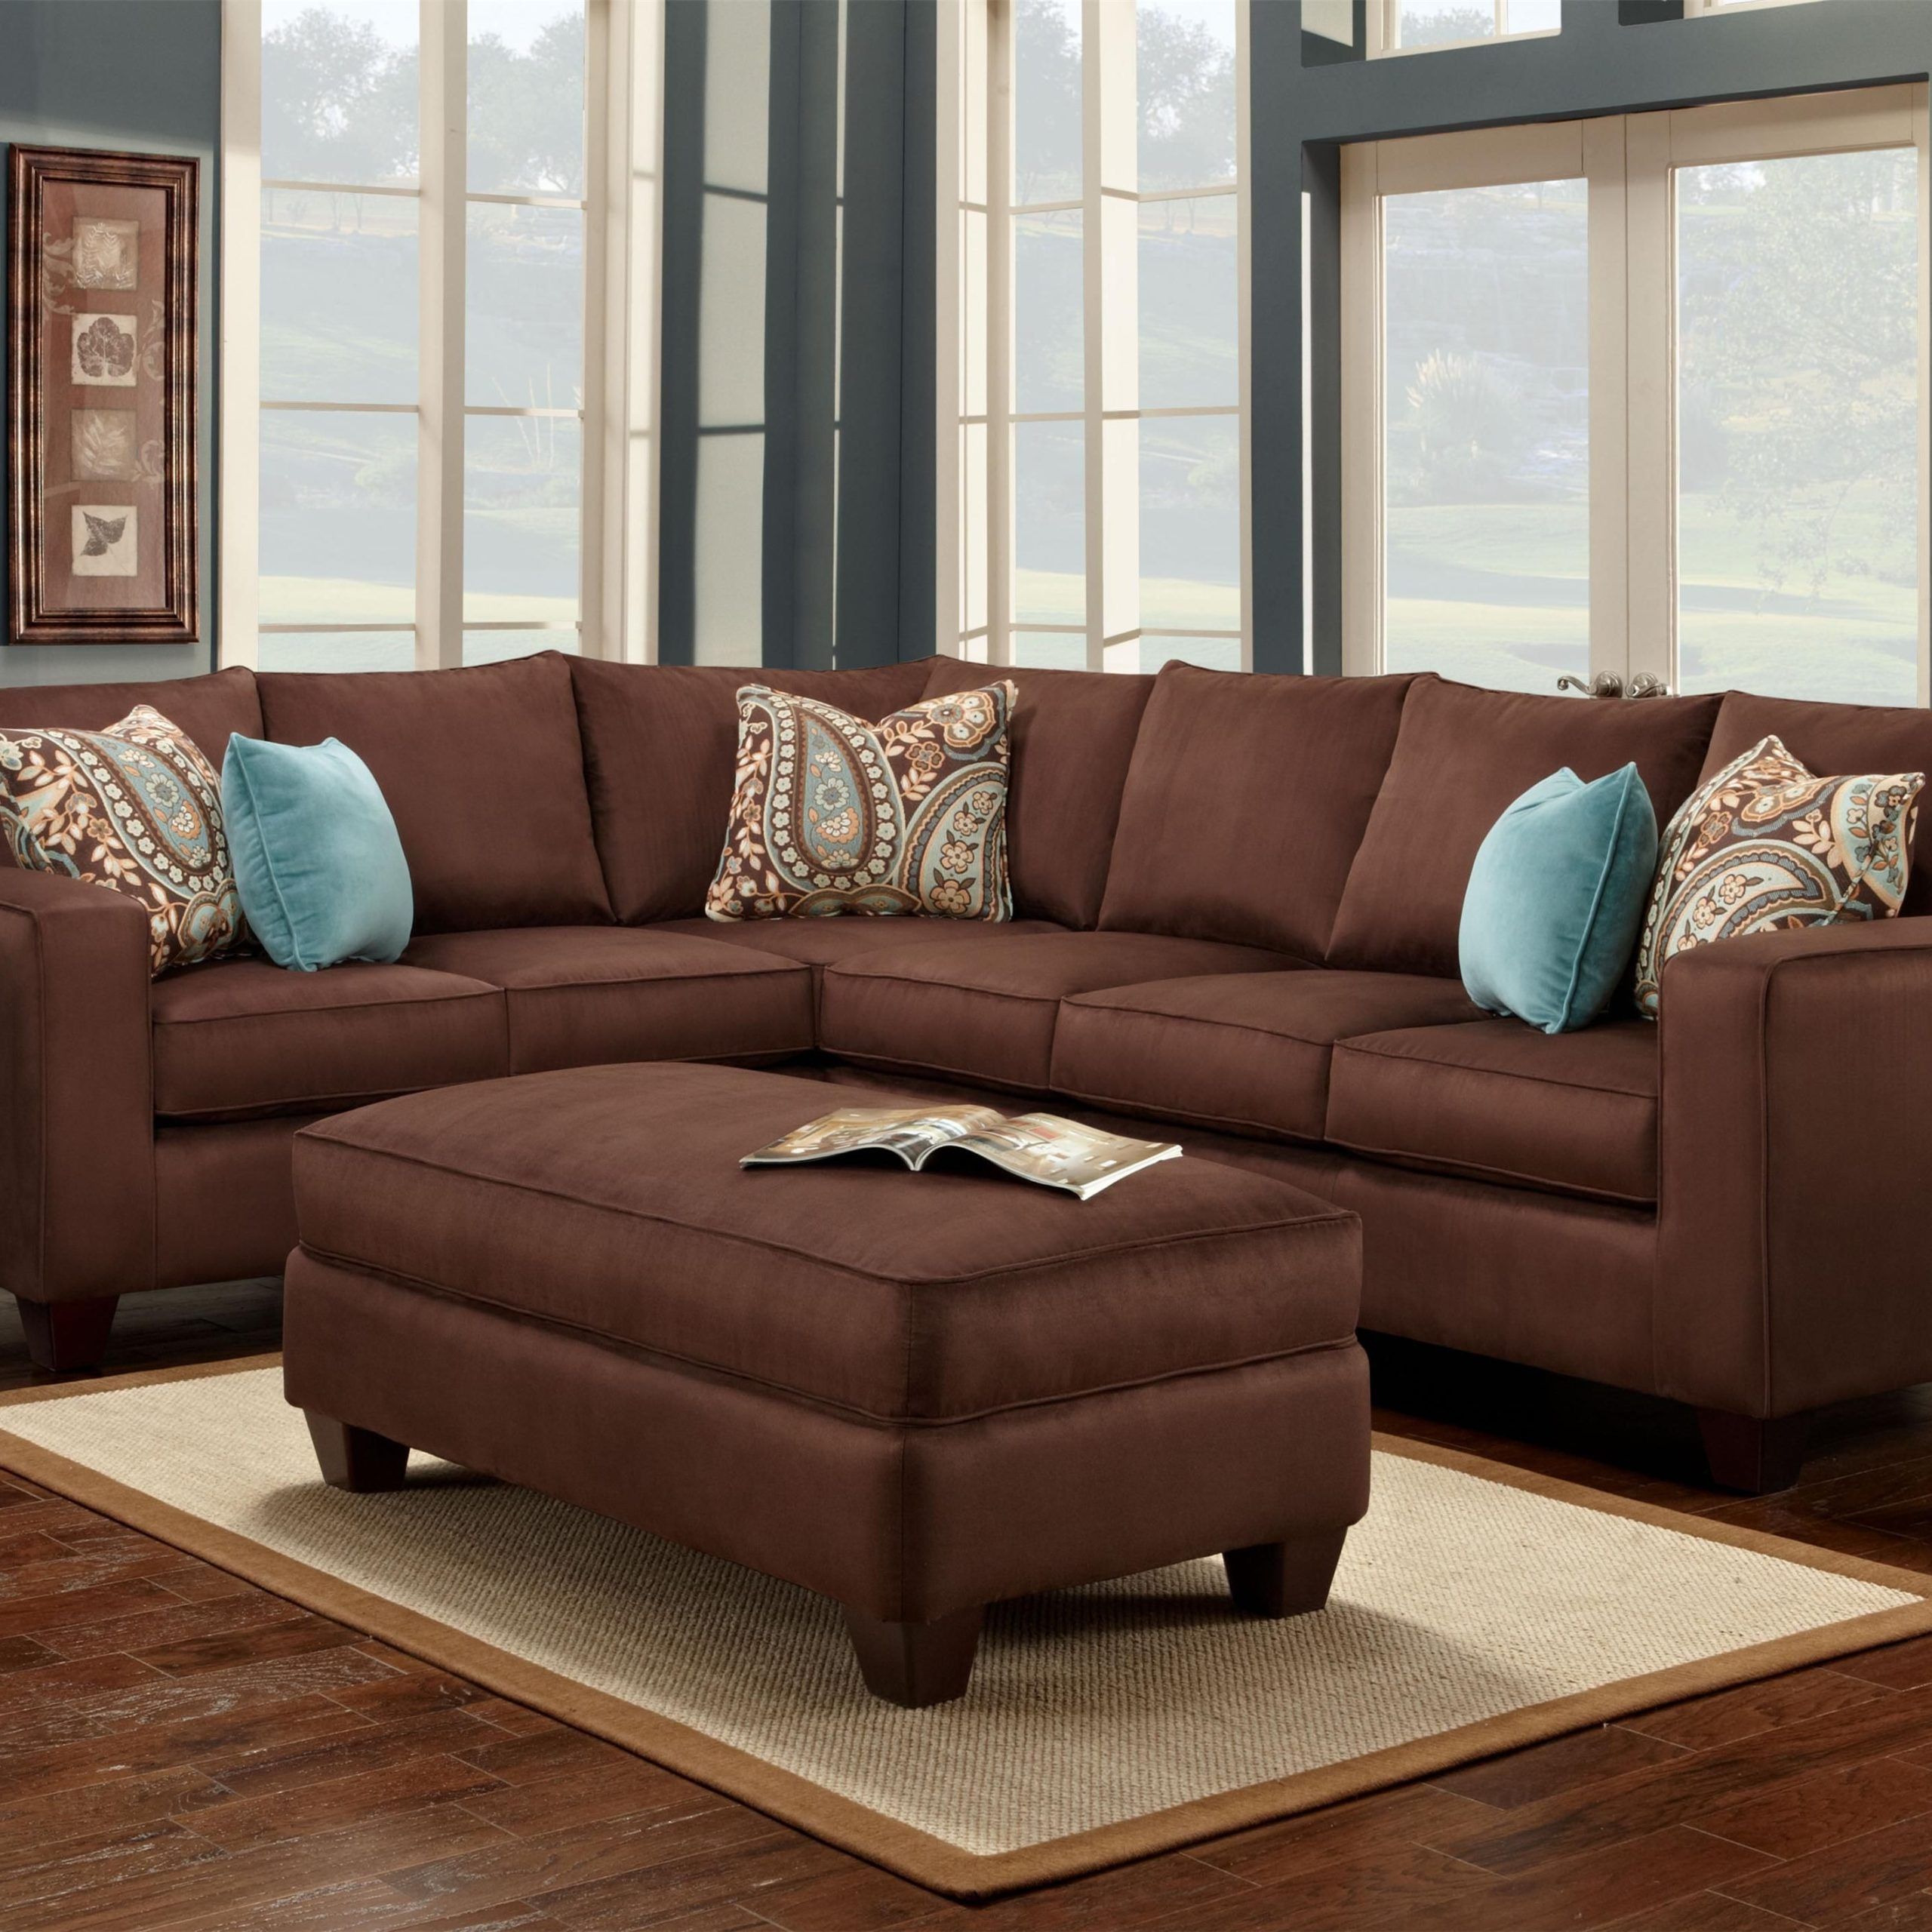 Featured Photo of 15 Best Collection of Sofas in Chocolate Brown